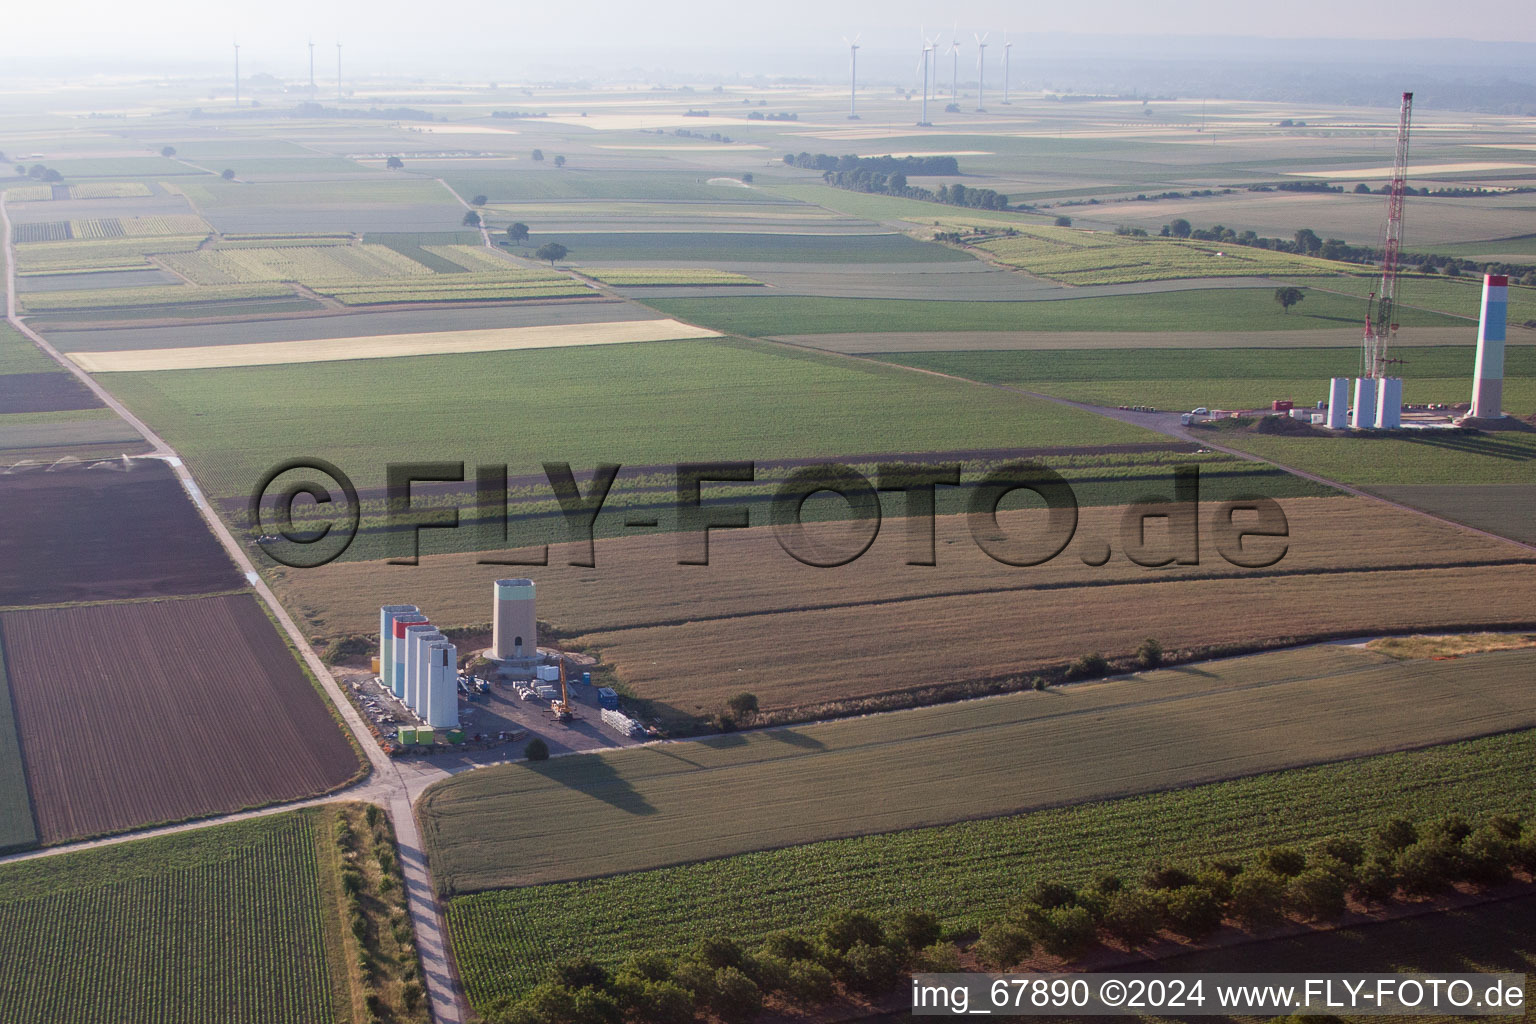 Drone recording of New wind farm in Offenbach an der Queich in the state Rhineland-Palatinate, Germany